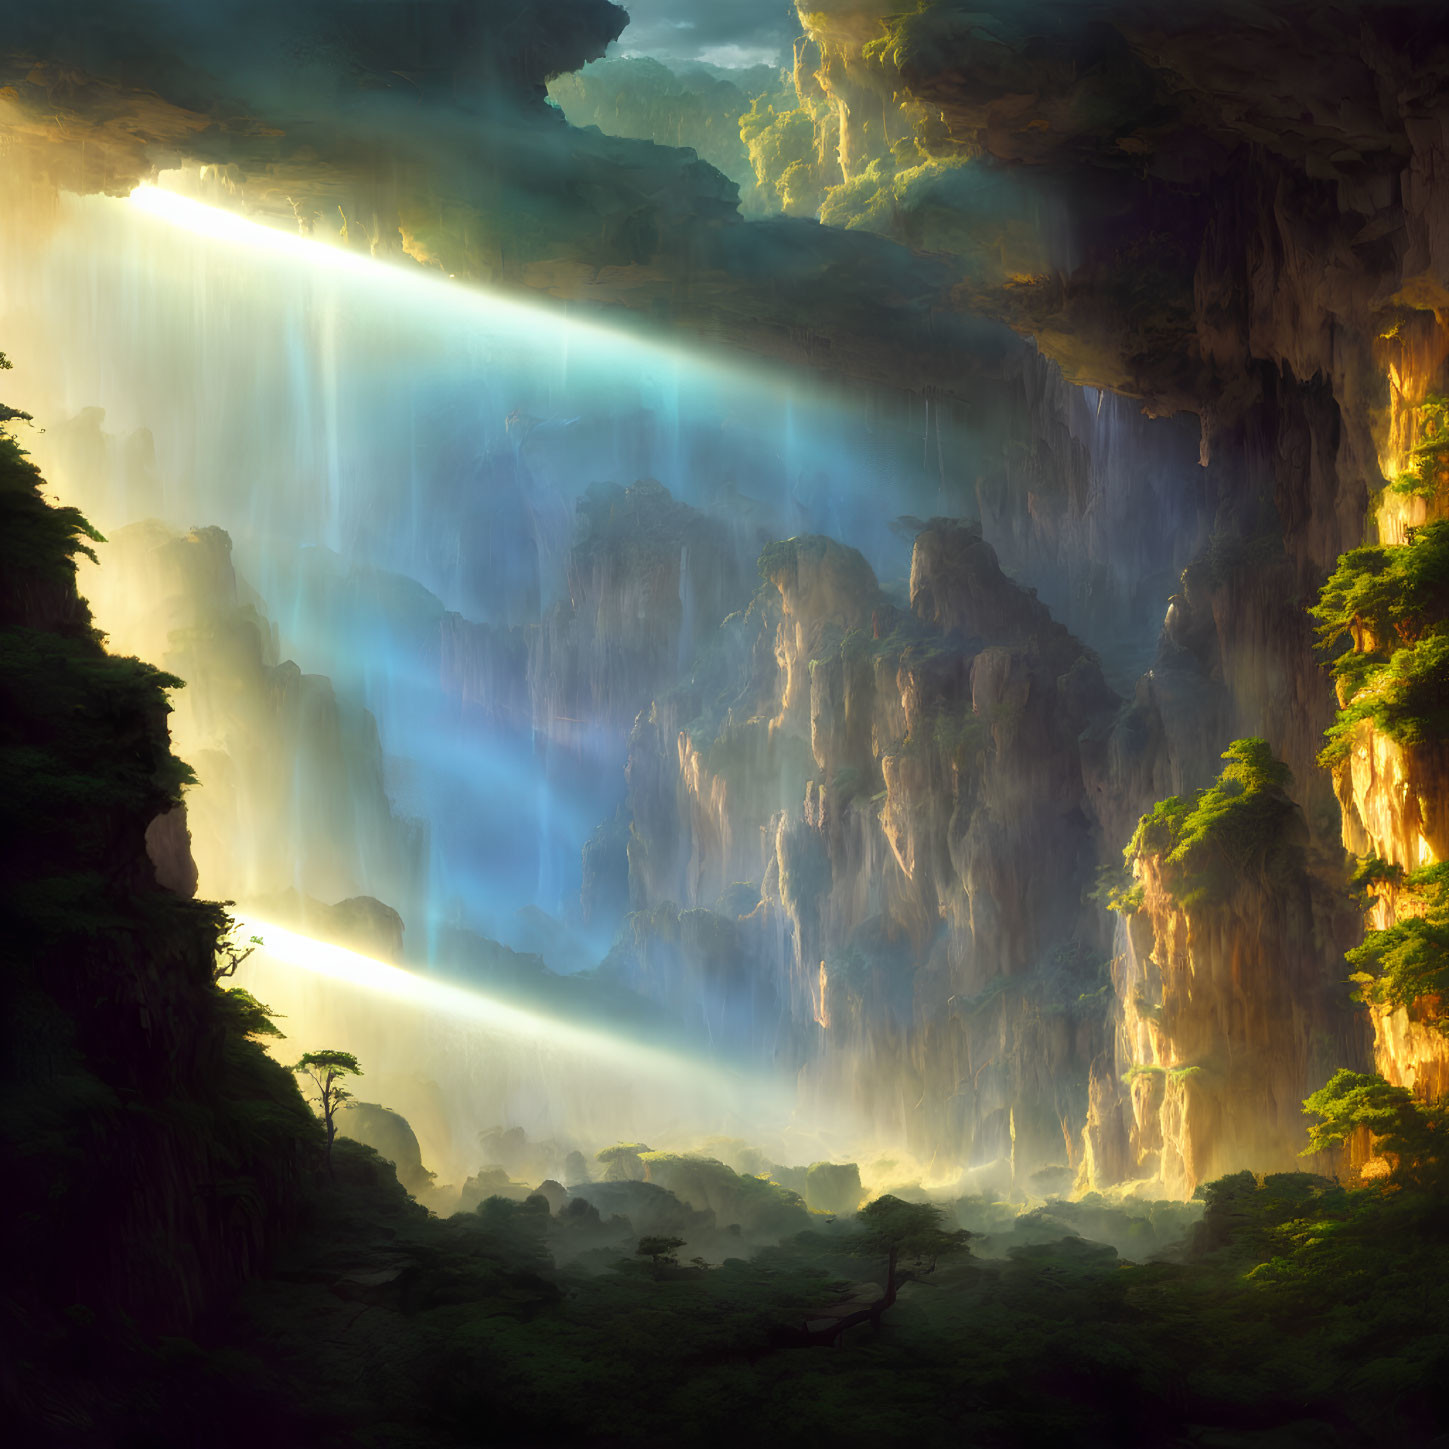 Sunlit Waterfall in Verdant Cavern with Misty Cliffs